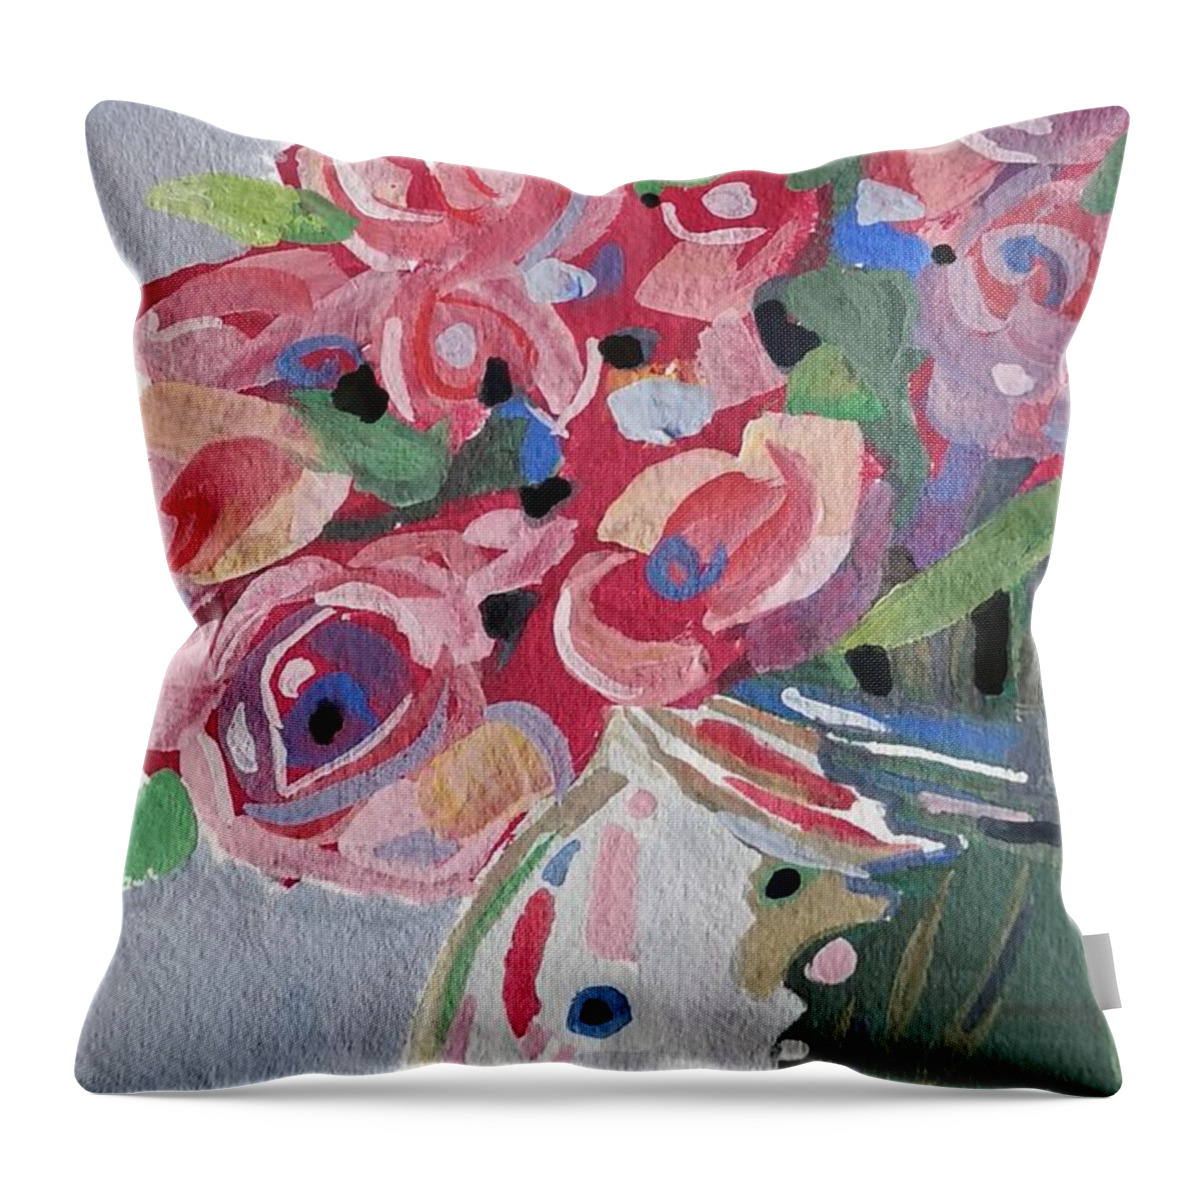 Still Life Throw Pillow featuring the painting Pink Roses by Sheila Romard